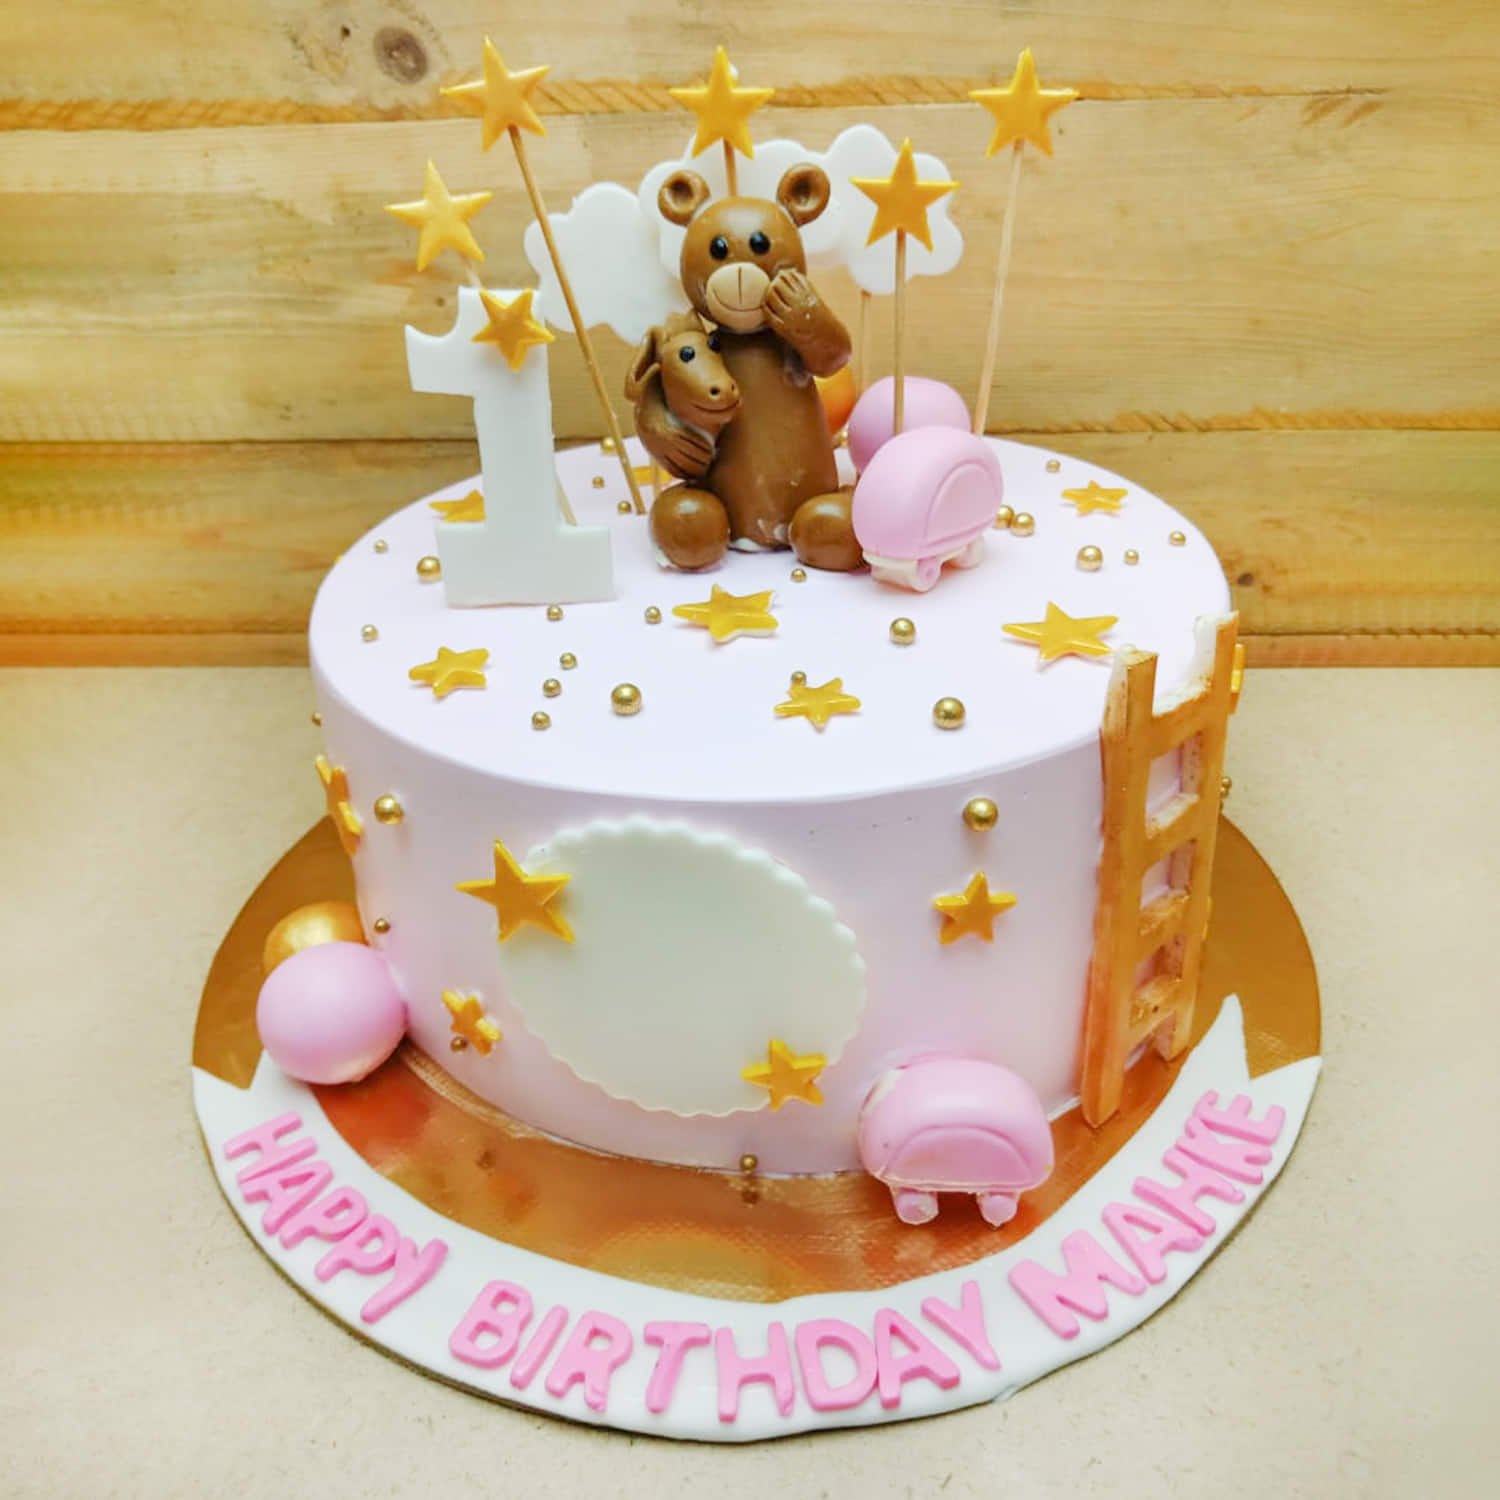 Anywhere Anytime Cake Delivery  1st Baby Birthday Cake Congratulations  Your little one is turning to one year old When it comes to celebrate  Think Celebrate Think Cute Cakes  9671586866 AACD 